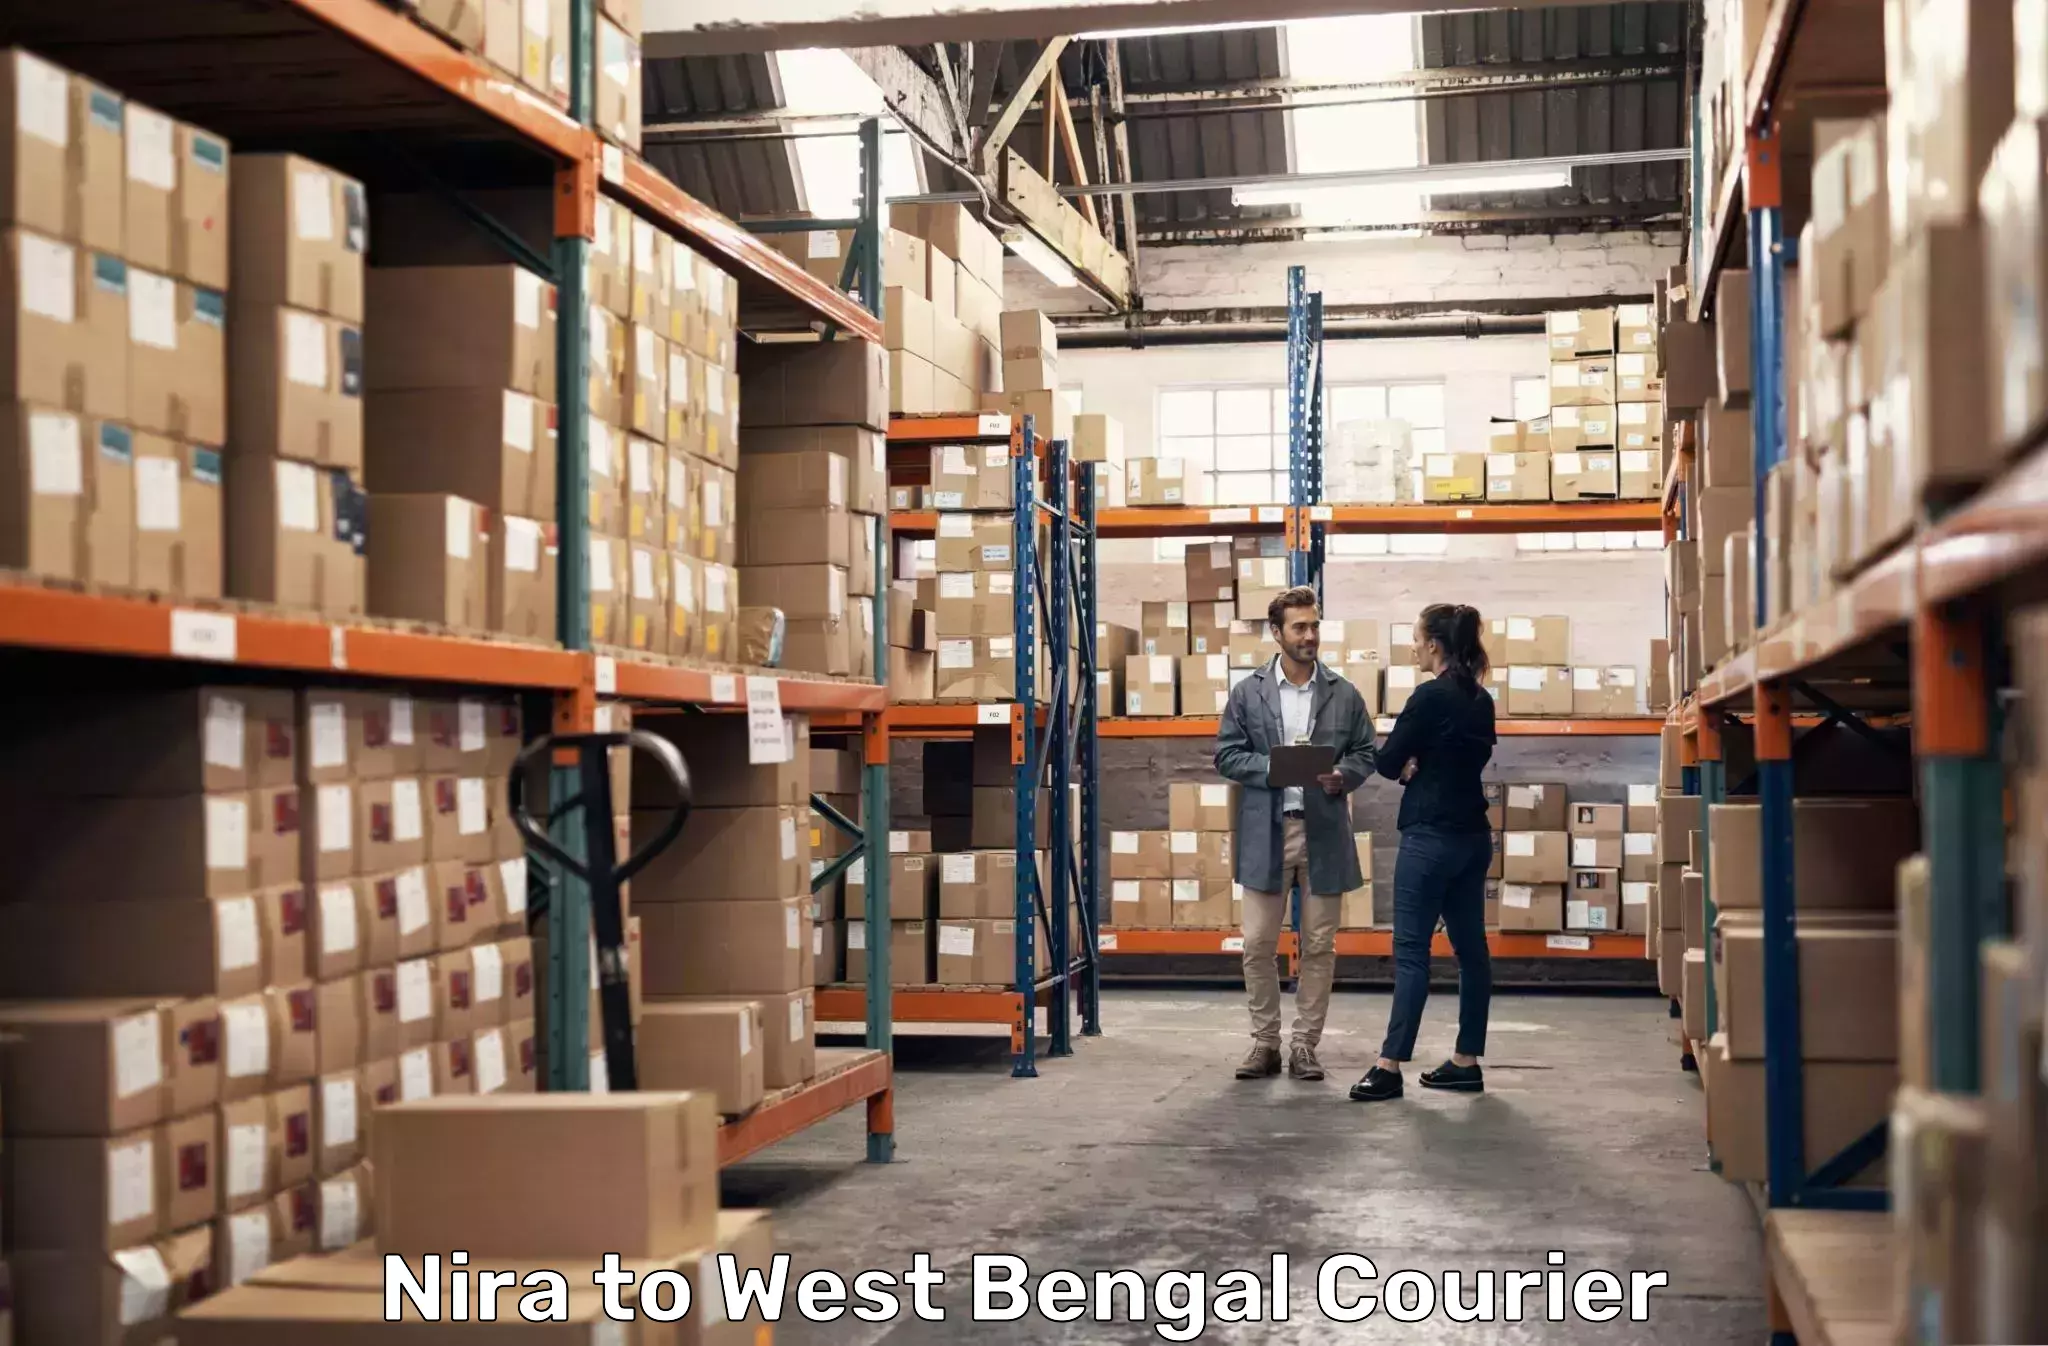 Flexible delivery schedules in Nira to Chittaranjan